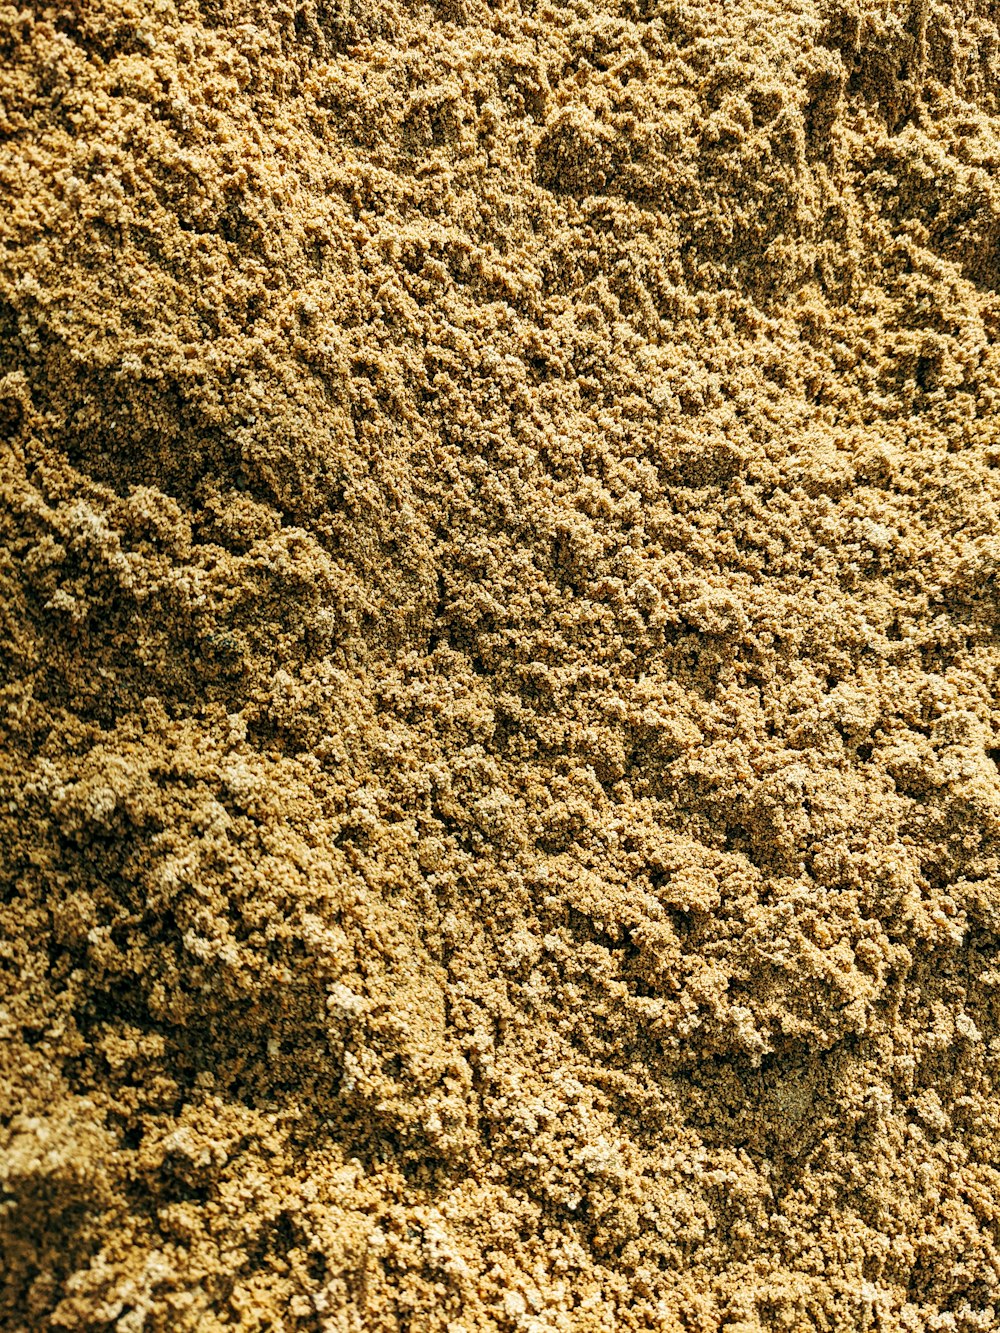 a close up view of a dirt surface